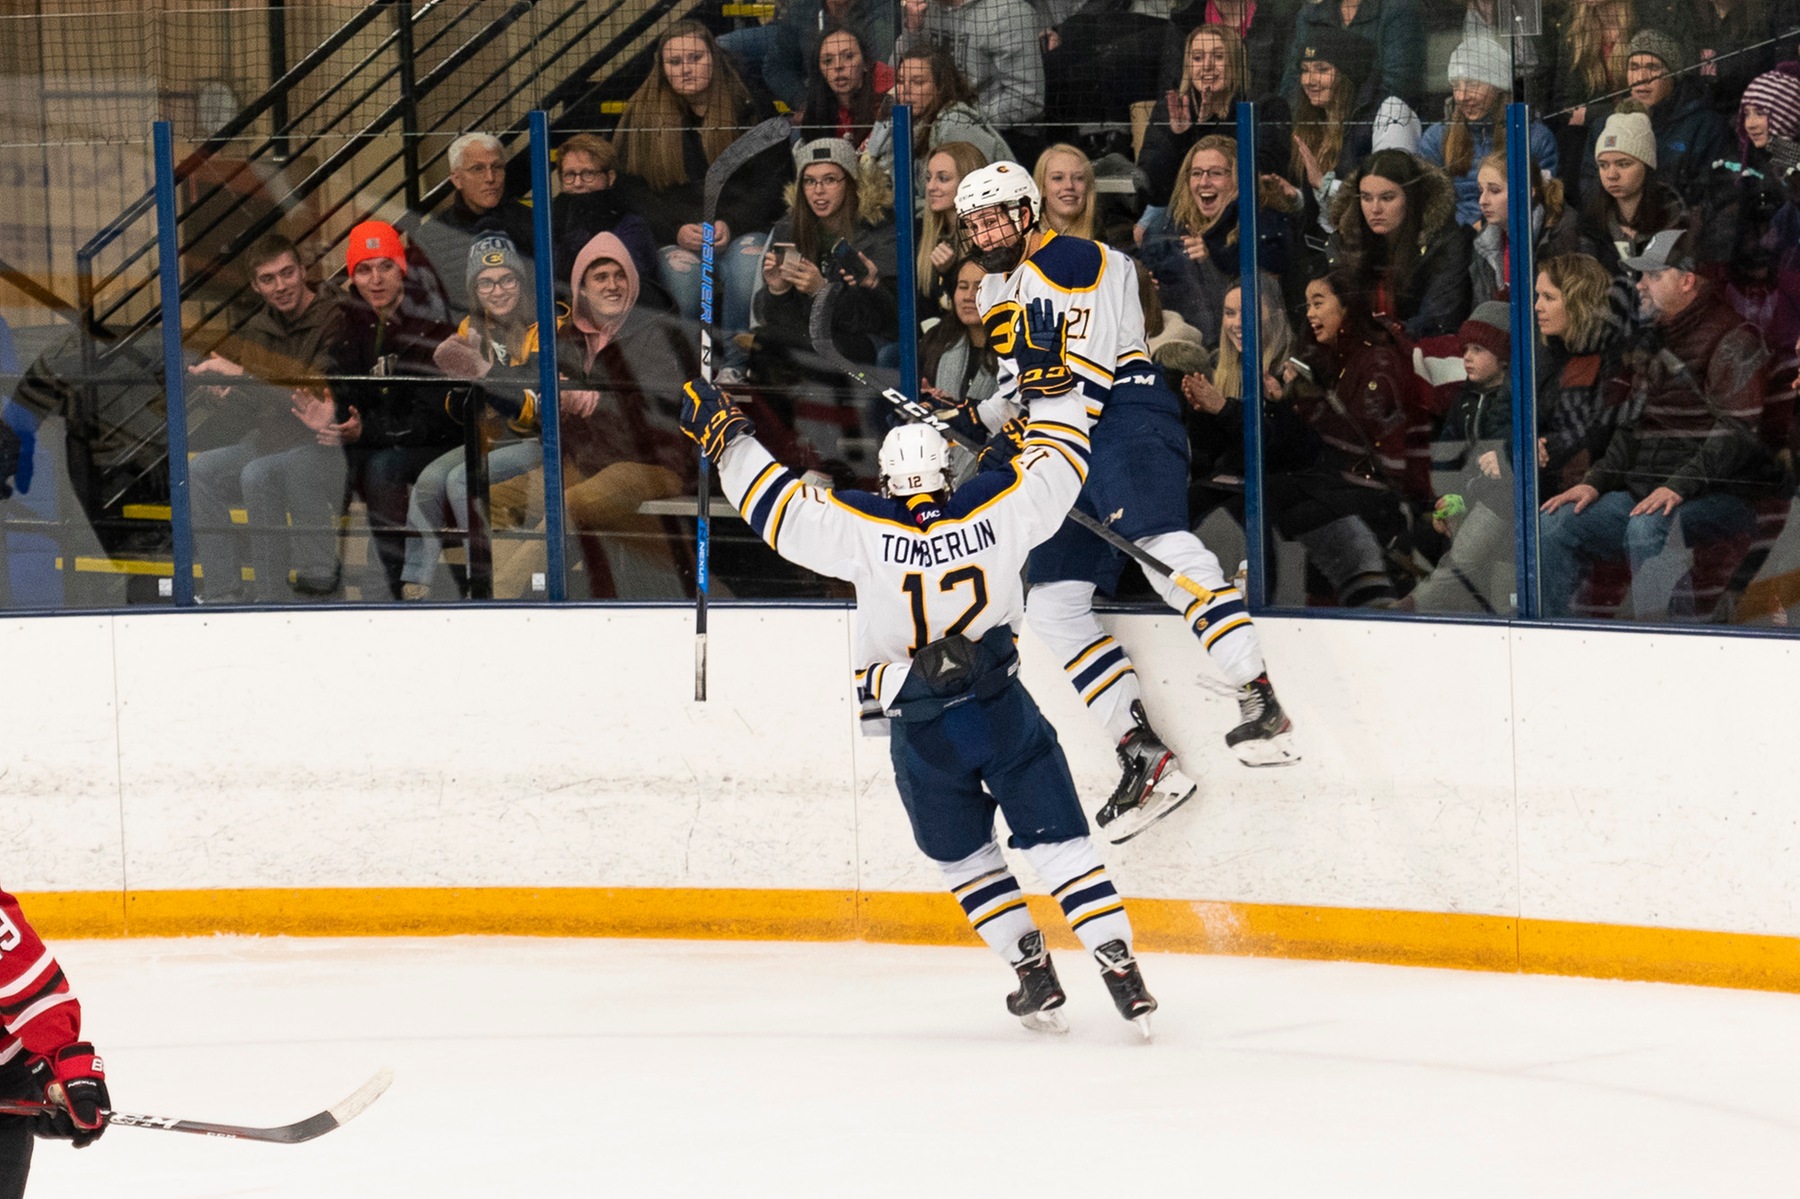 Photo by Connor Miller, UWEC Photo